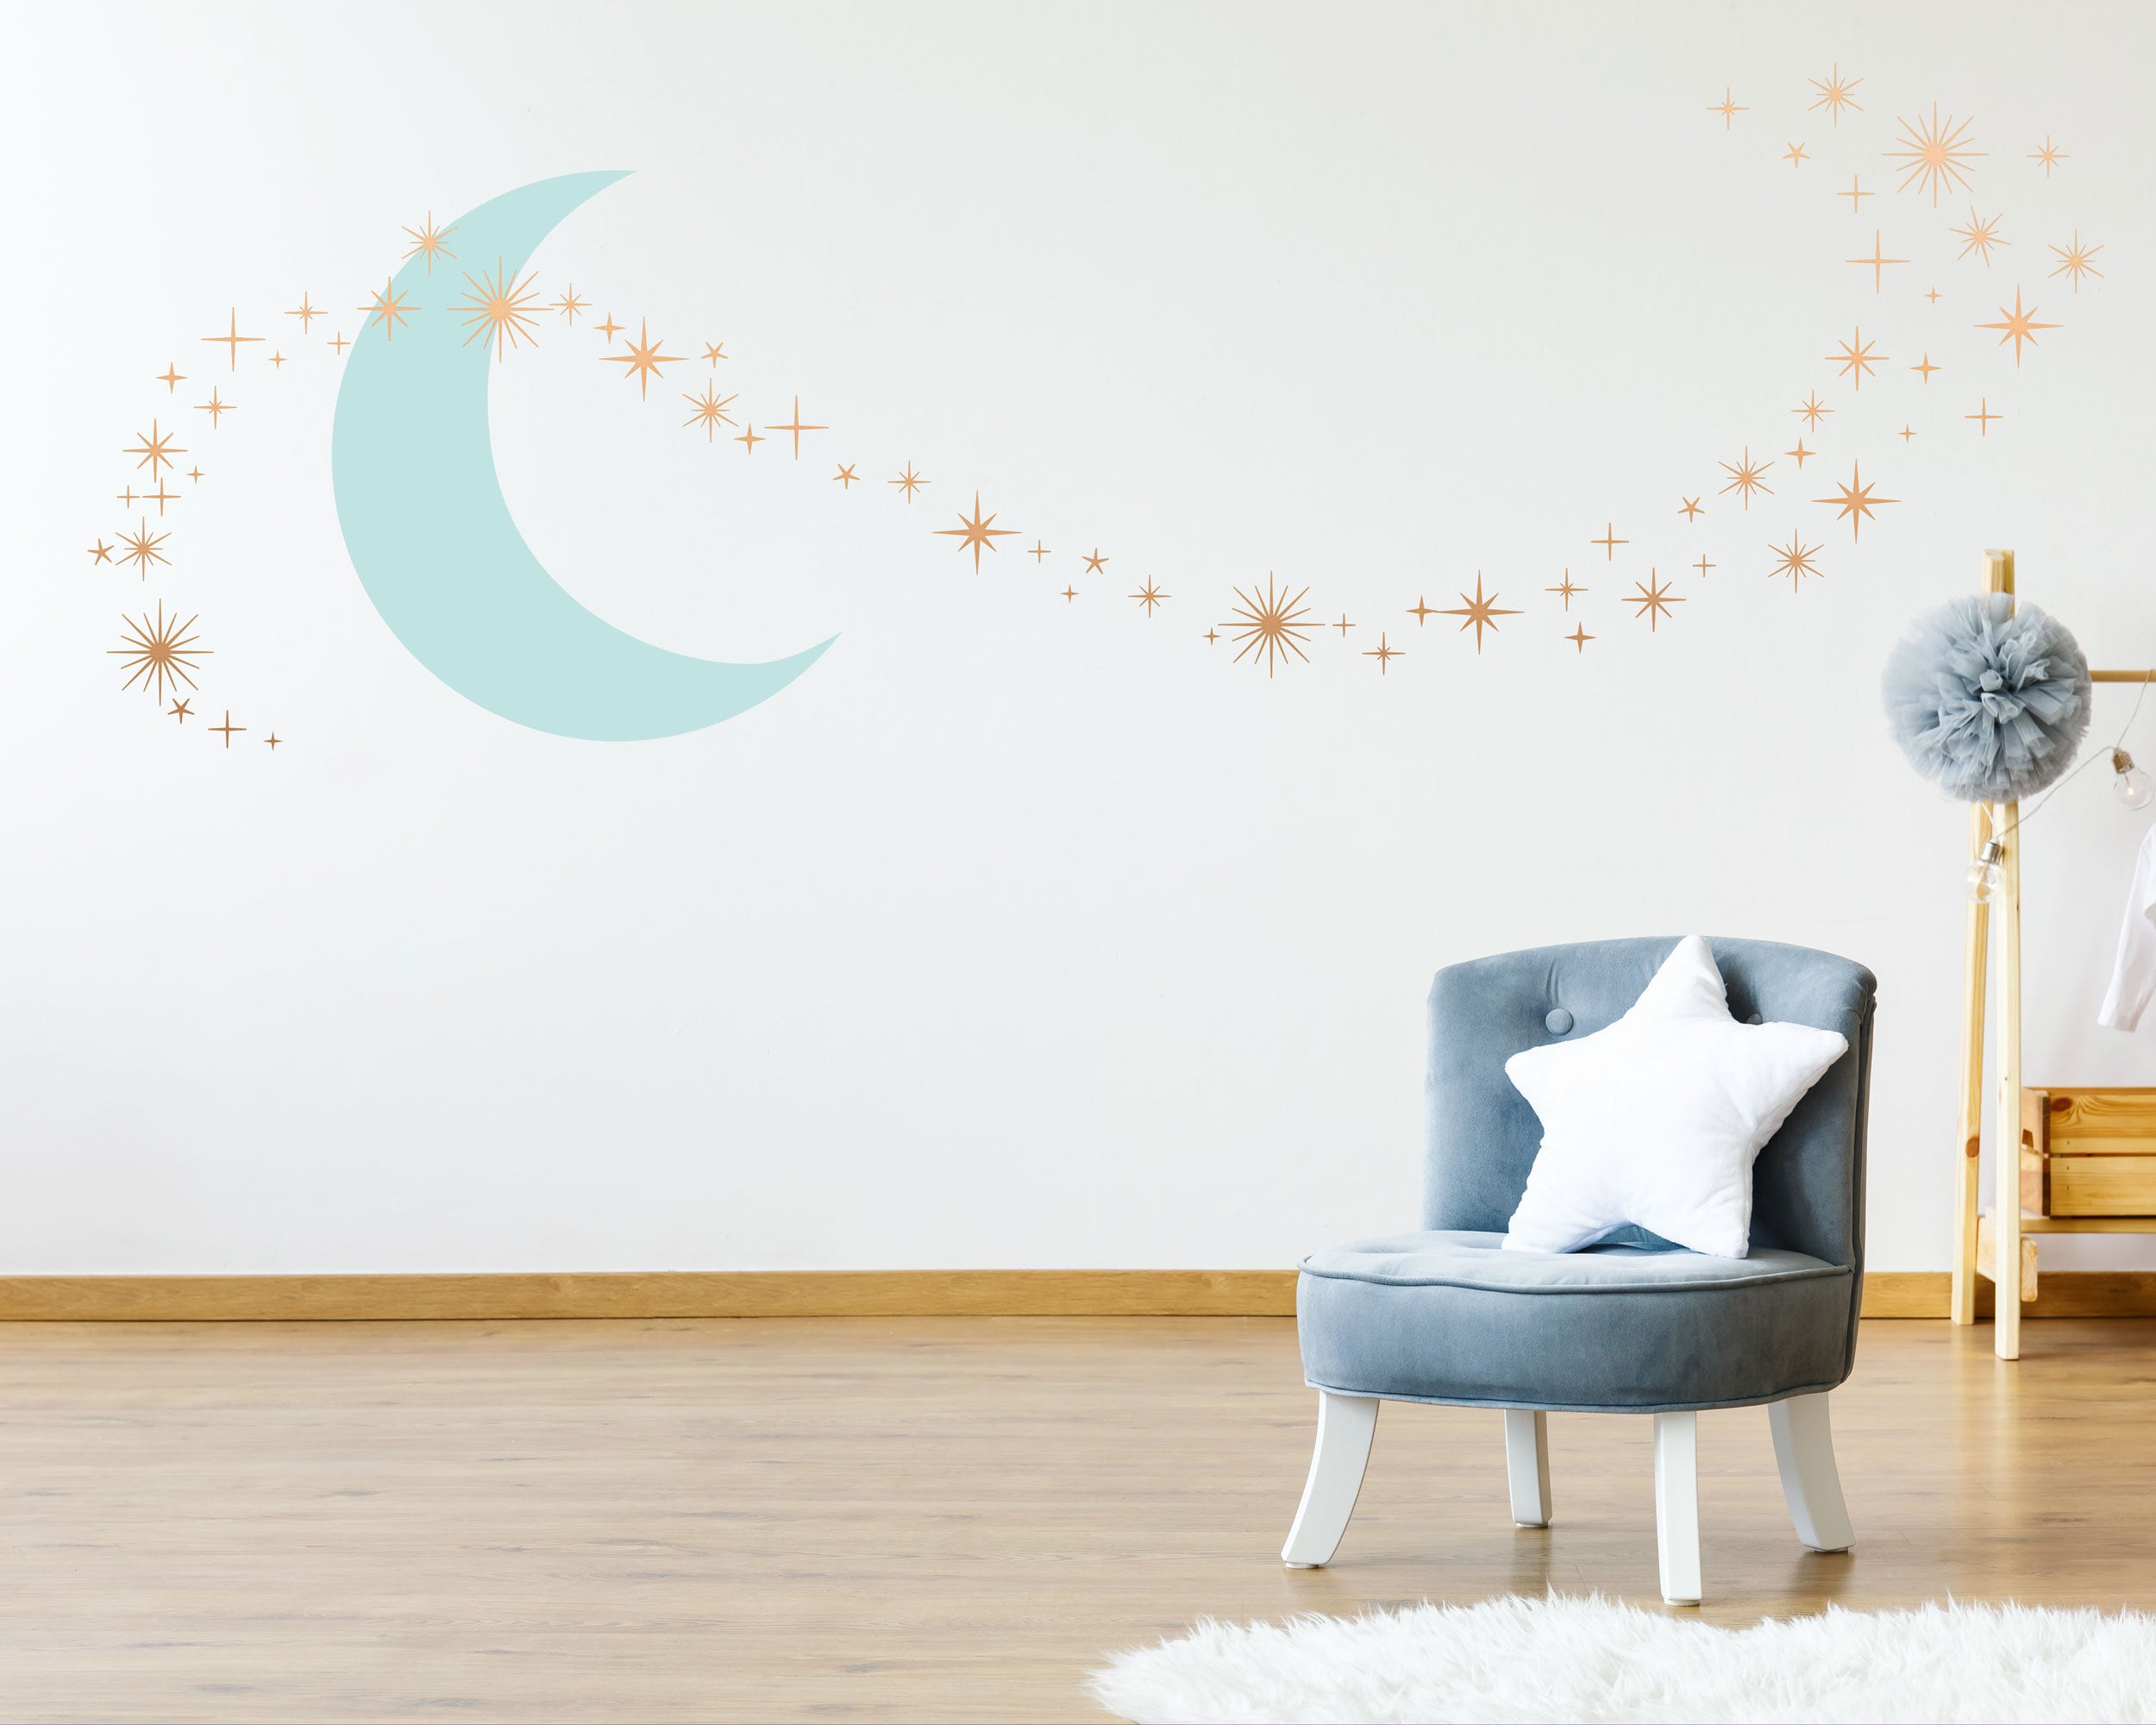 756 Pieces Glow In The Dark Wall Stickers Luminous Moon Planet Spaceship  Wall Decals Fluorescent Star Ceiling Stickers For Home Bedroom Kids Room  Party Wall Decorations (Fluo Blue) Walmart Canada | Cartoon